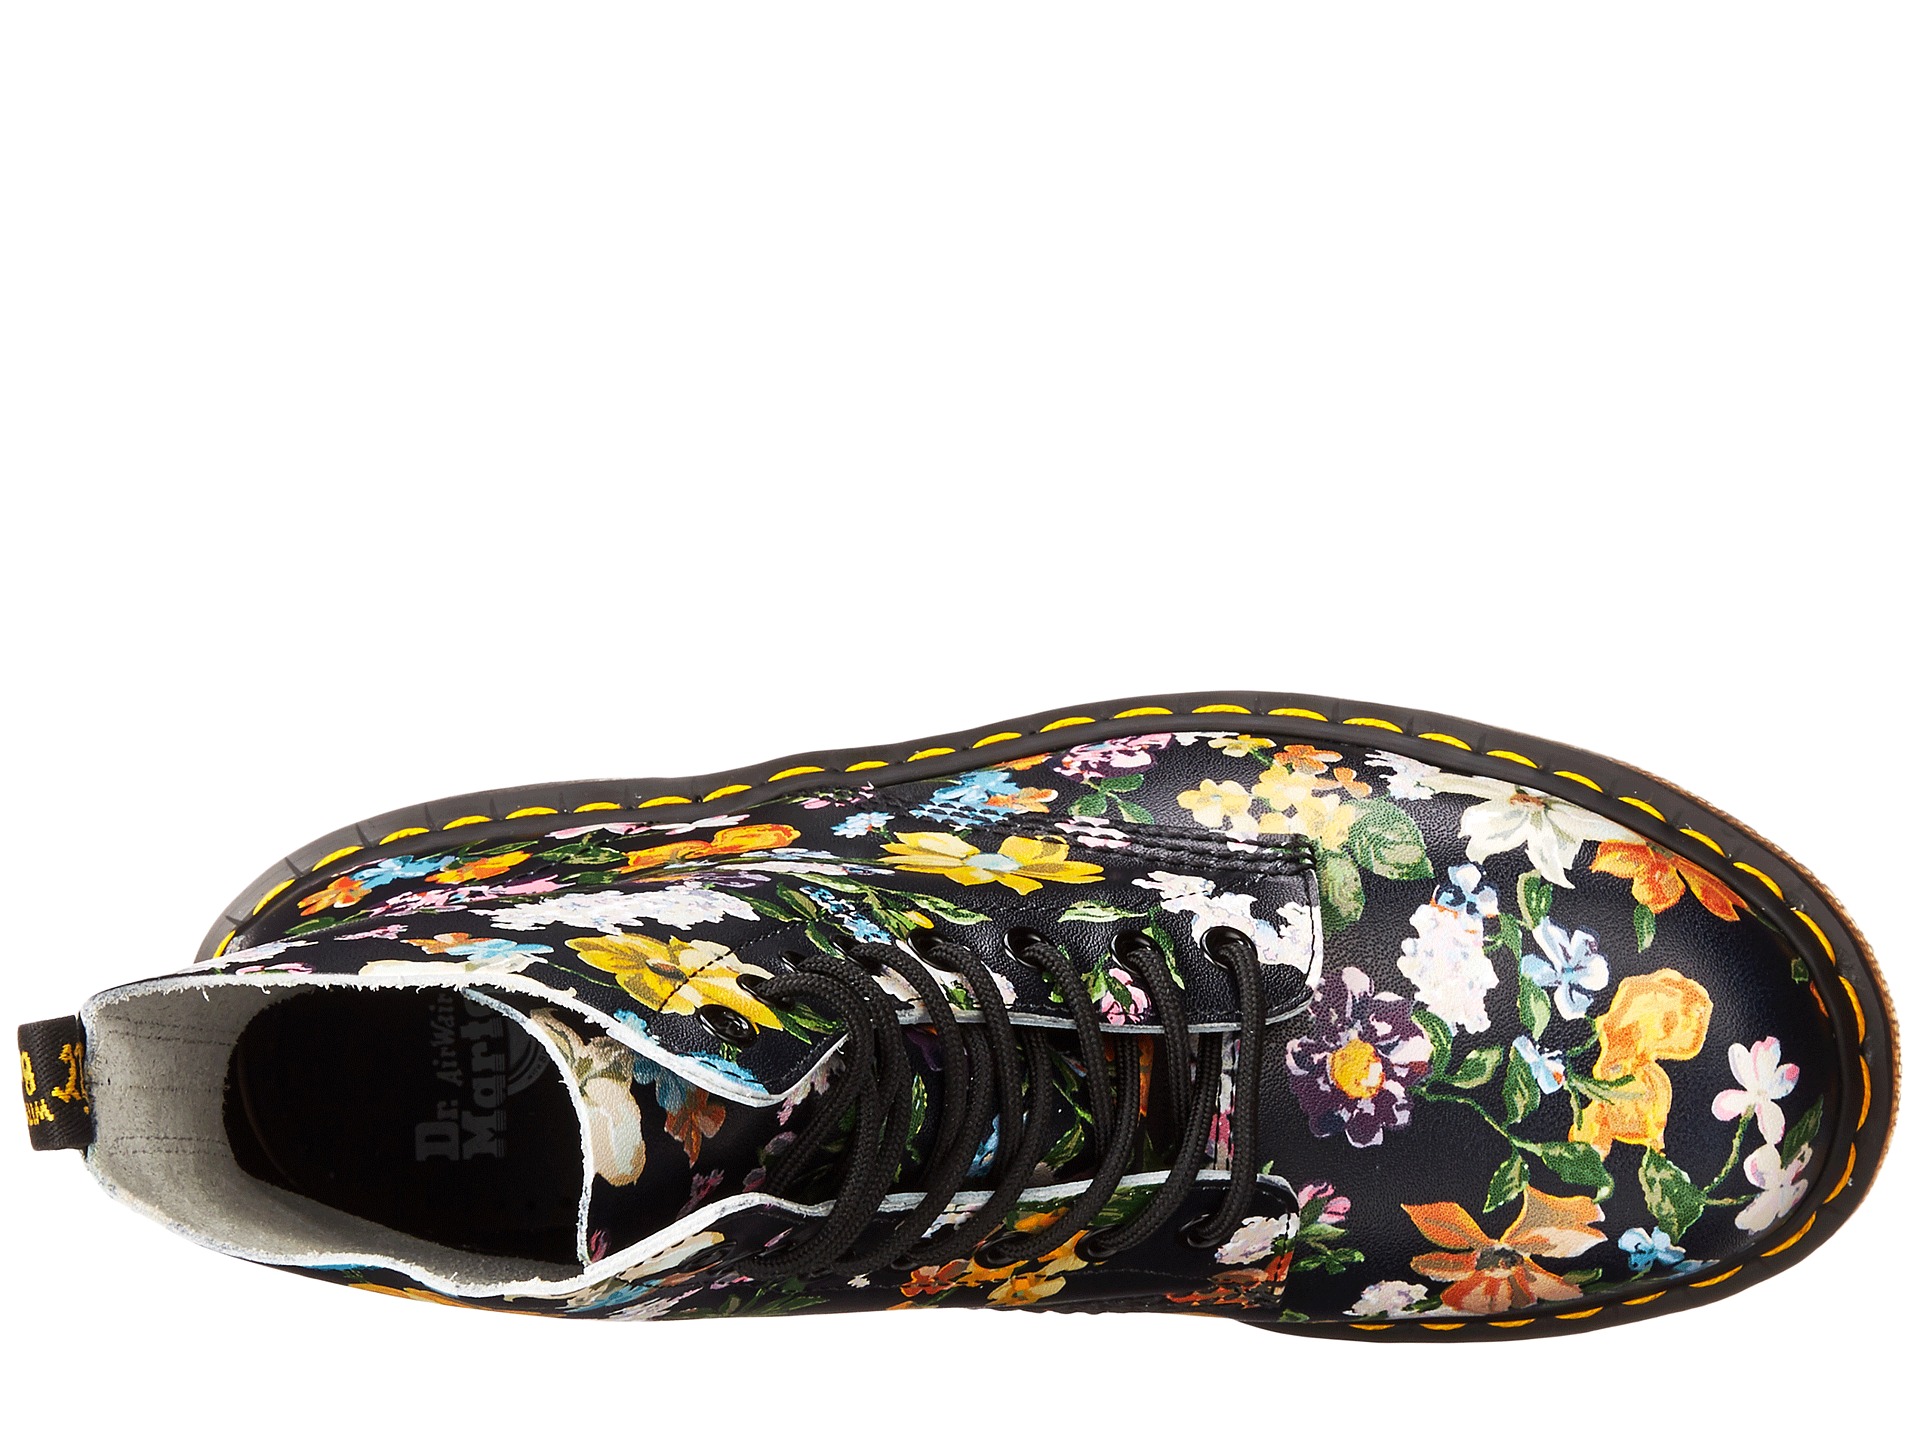 Dr. Martens Pascal Darcy Floral 8-Eye Boot at Zappos.com